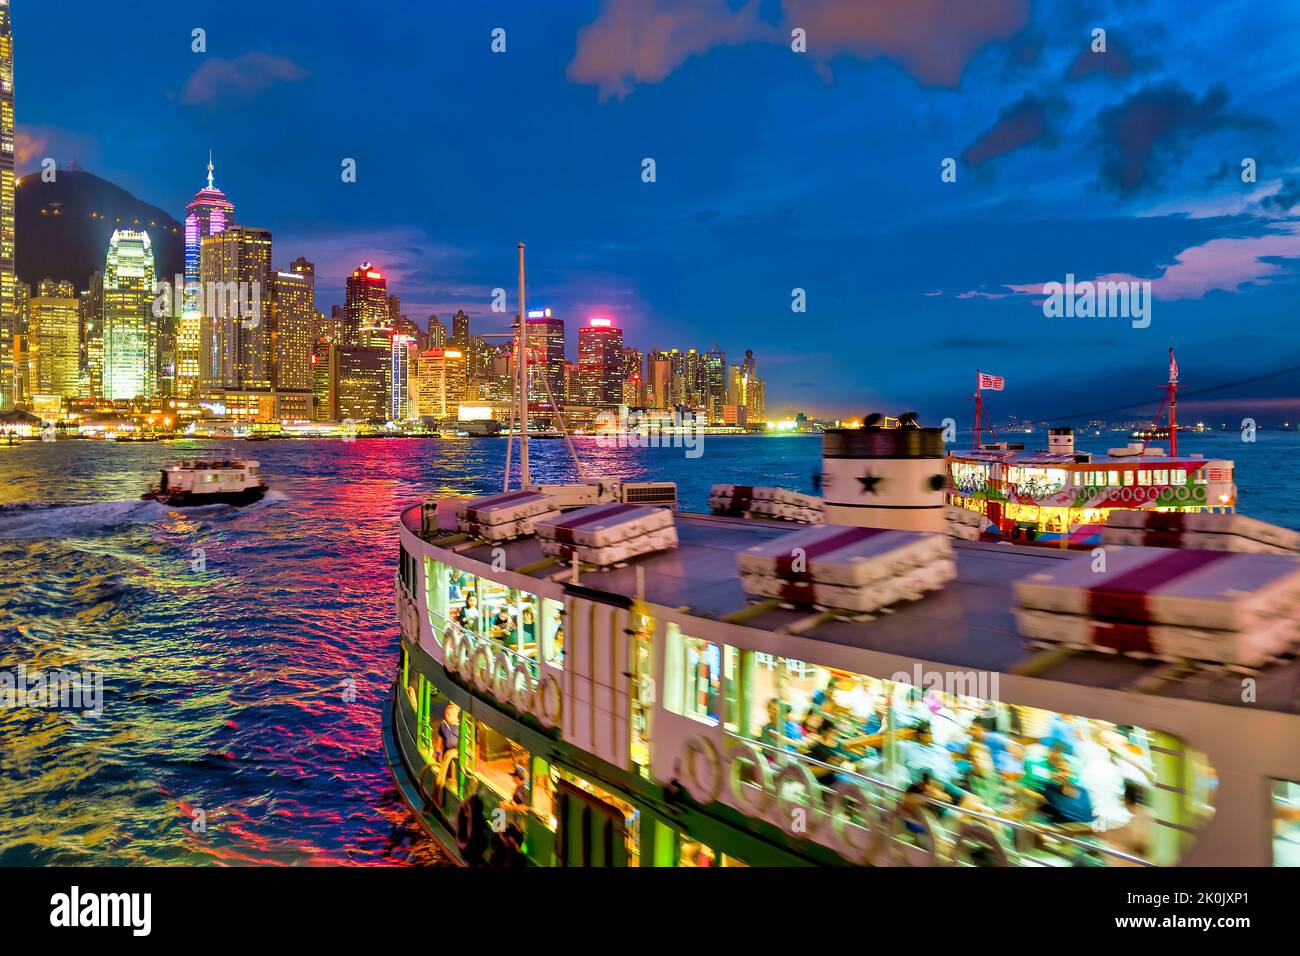 A star ferry in the Victoria Harbour at sunset, Hong Kong, China Stock Photo